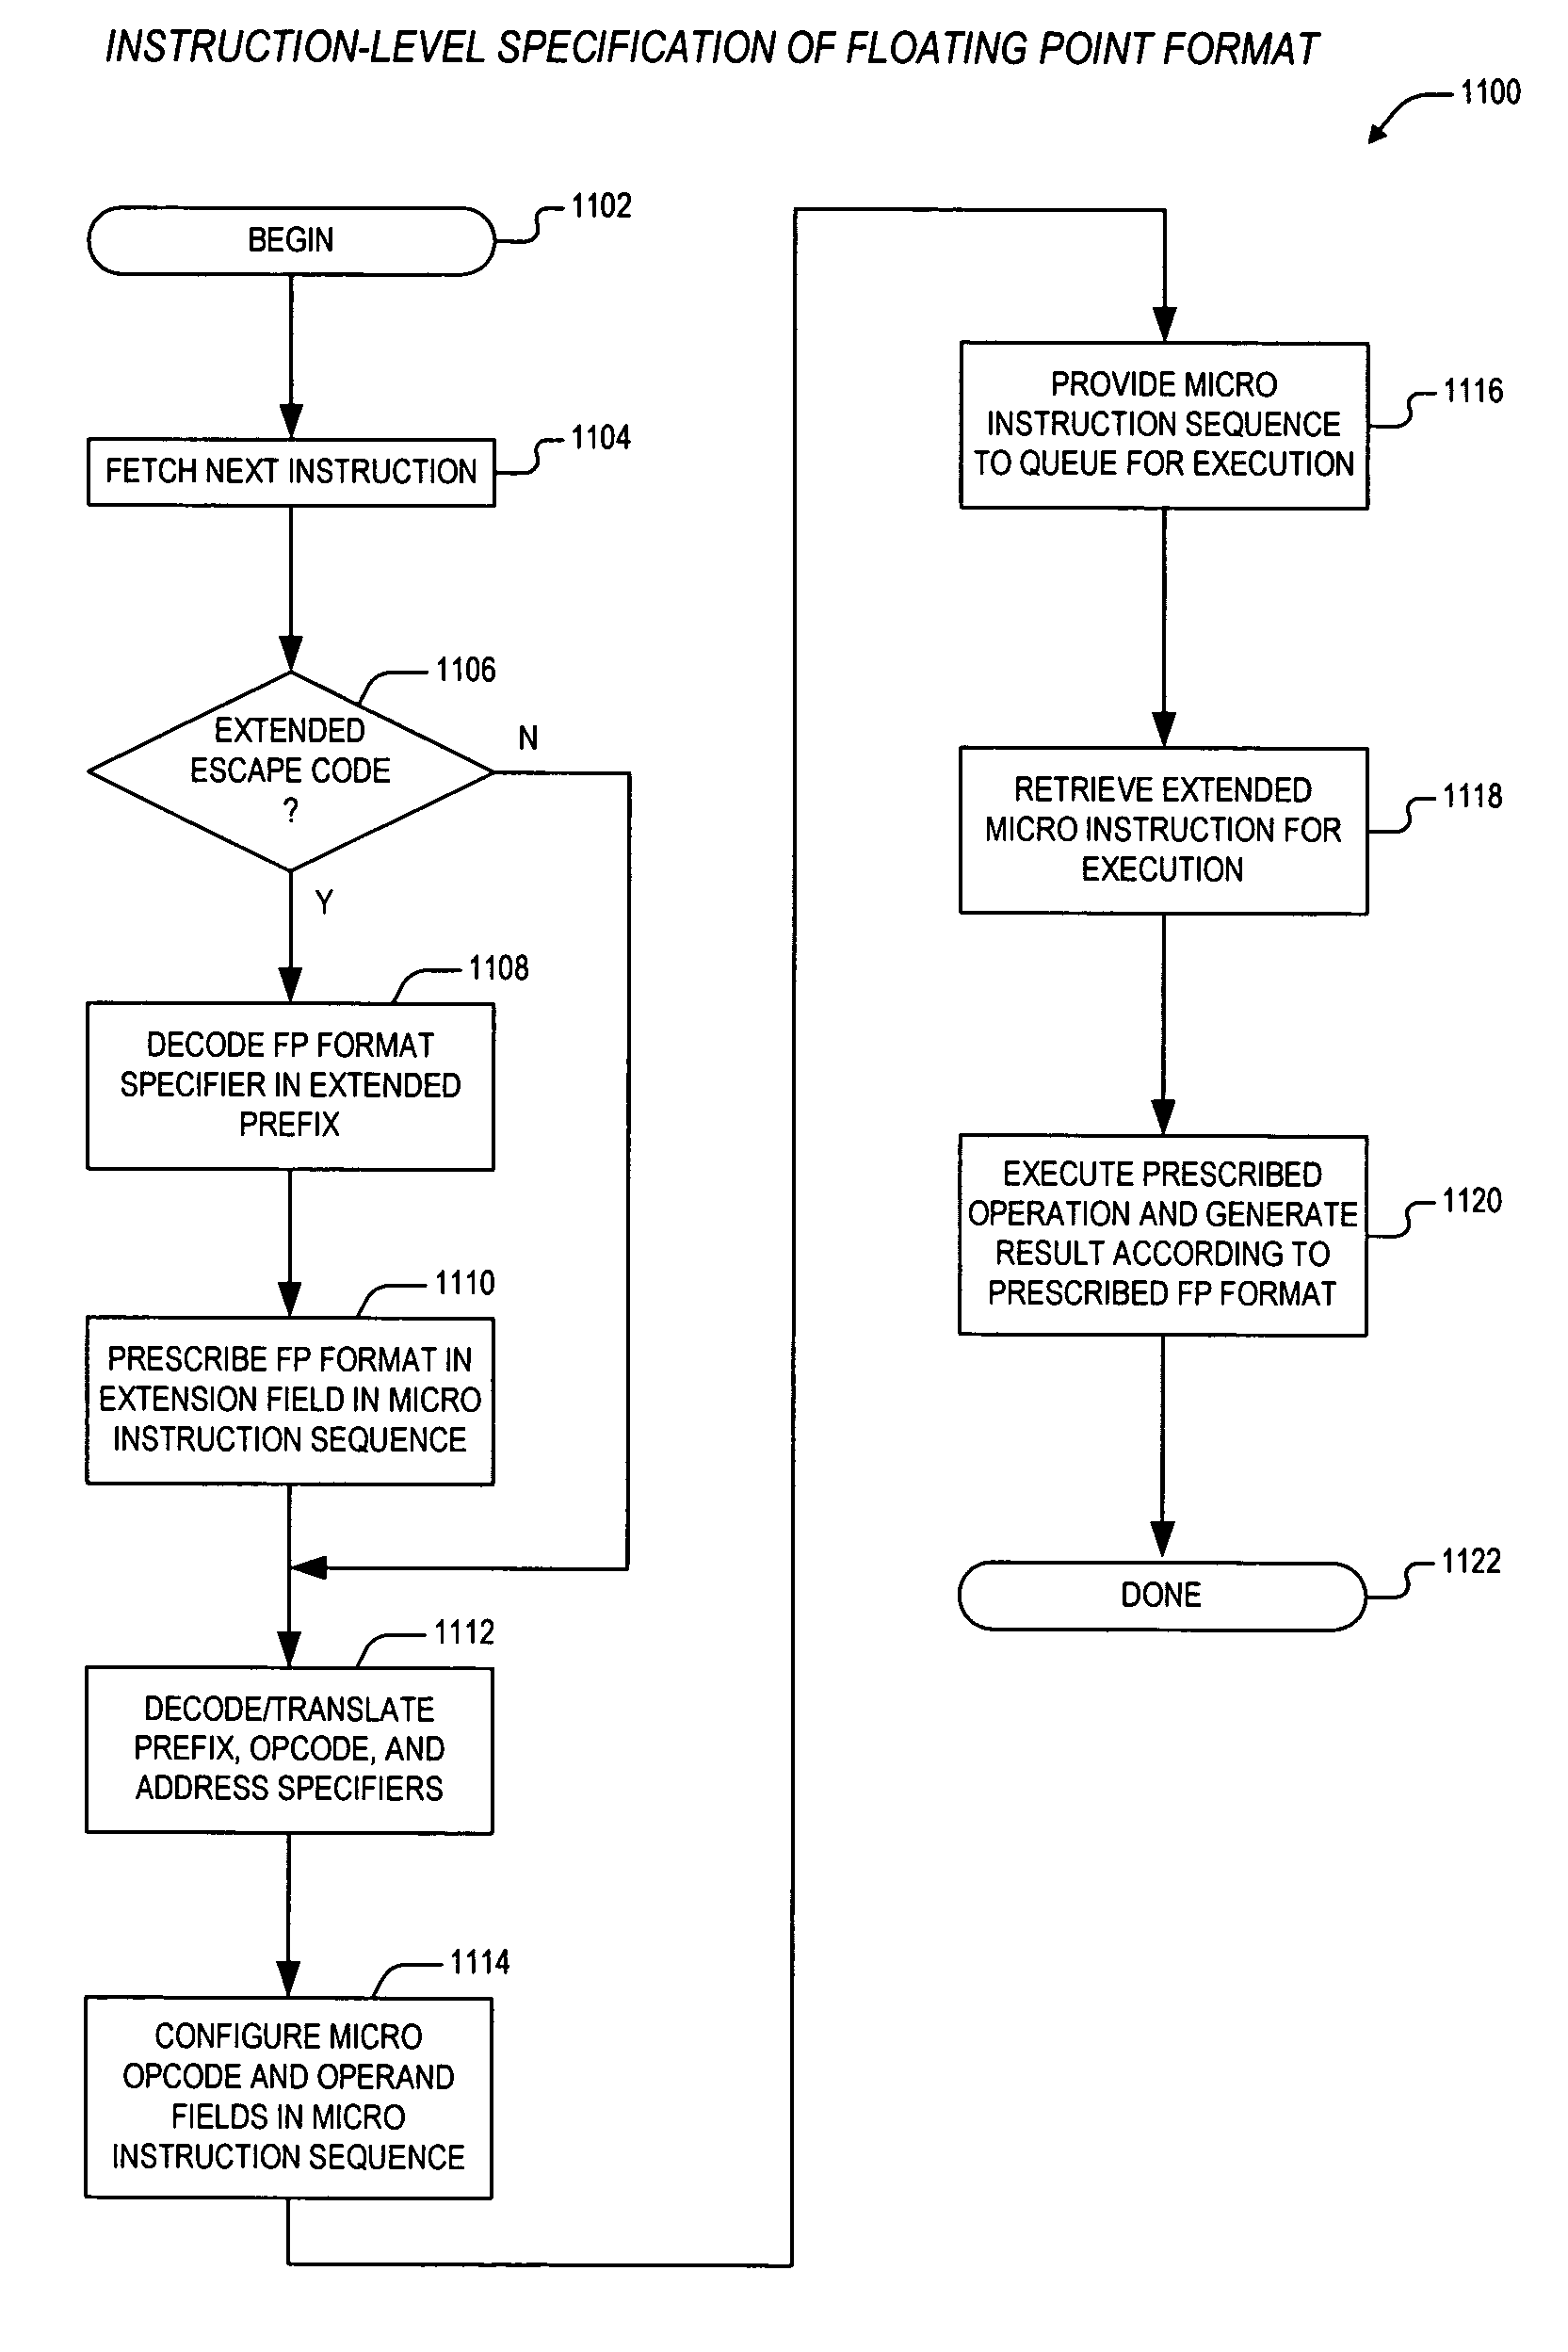 Apparatus and method for instruction-level specification of floating point format